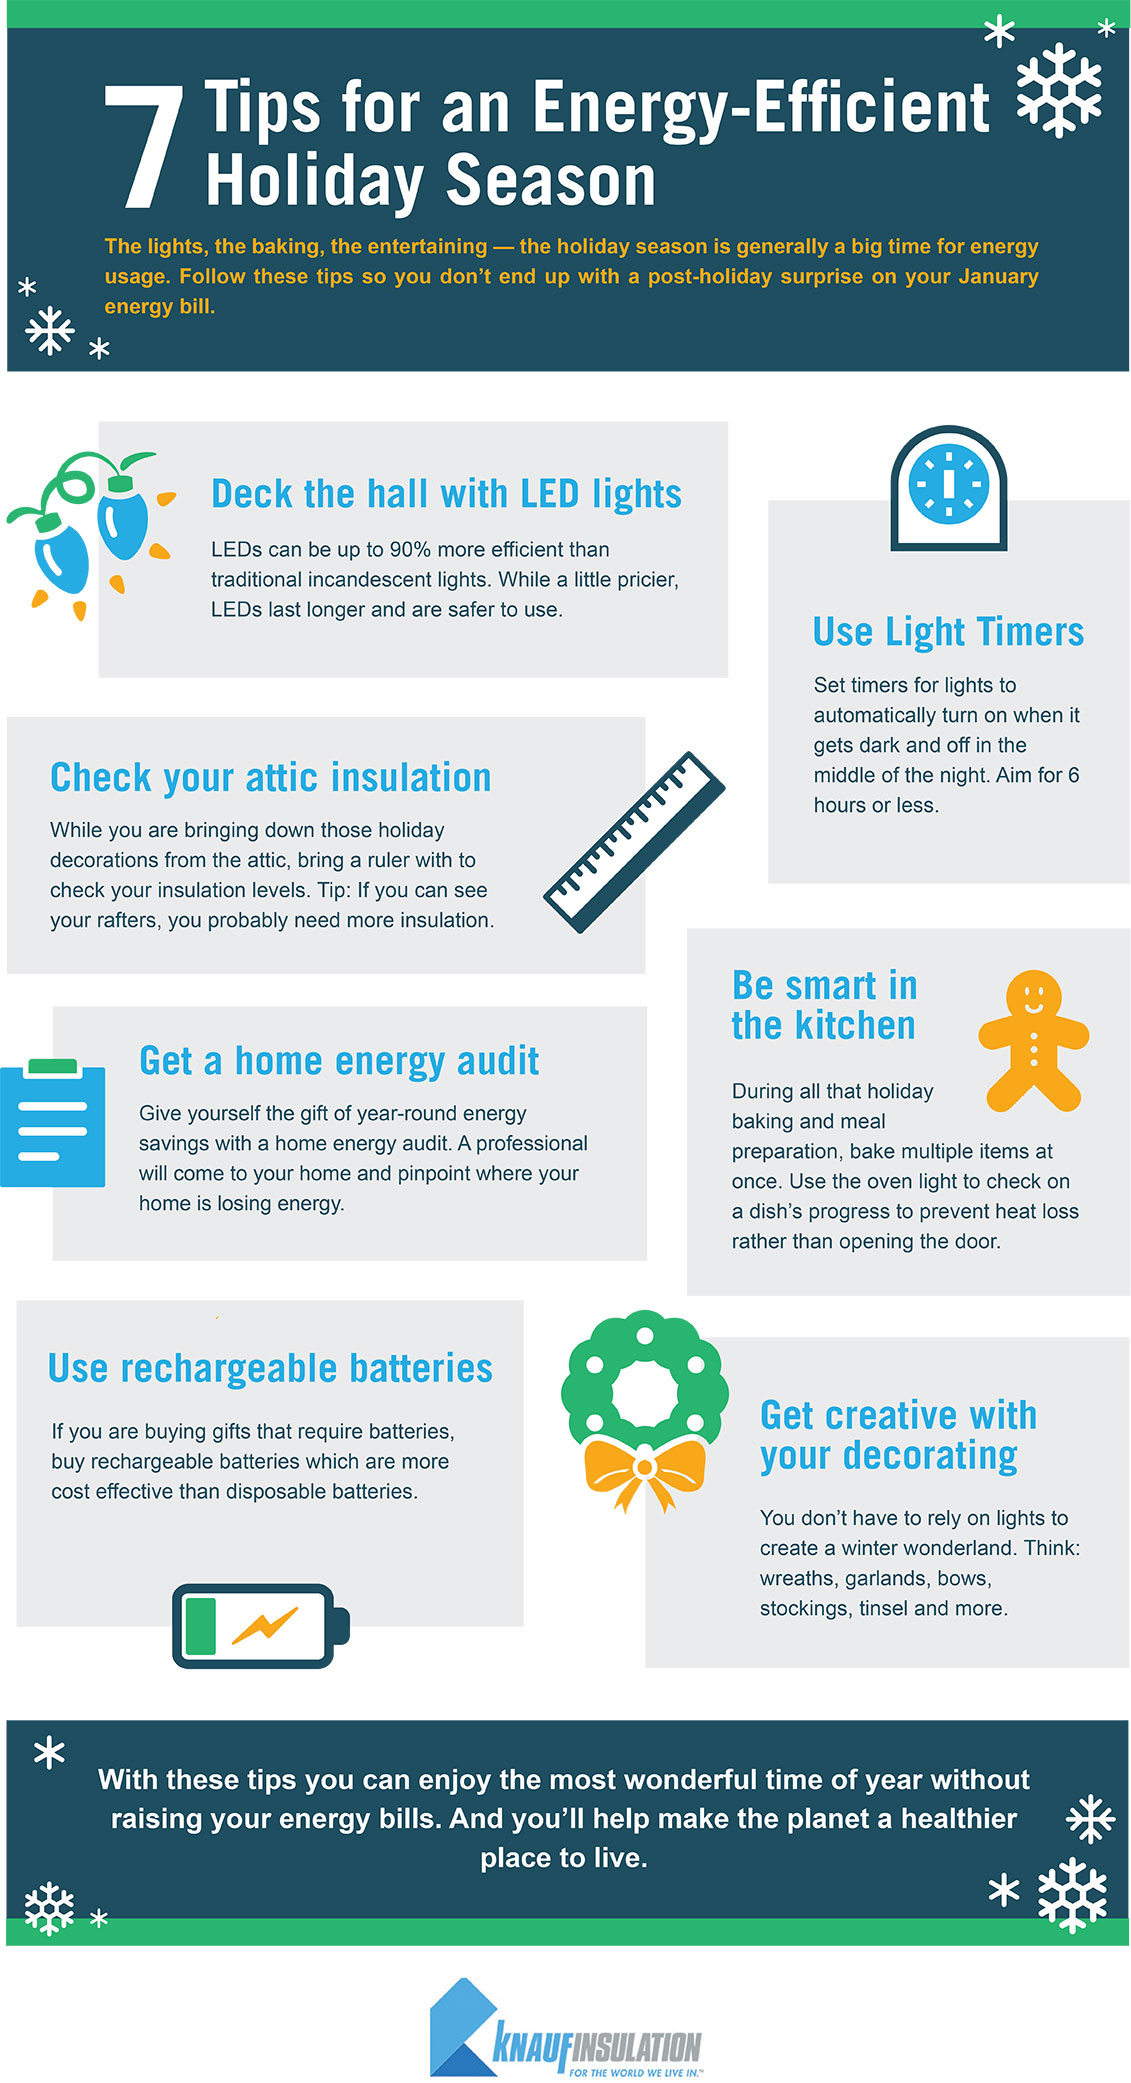 How To Save Energy At Home During The Holidays